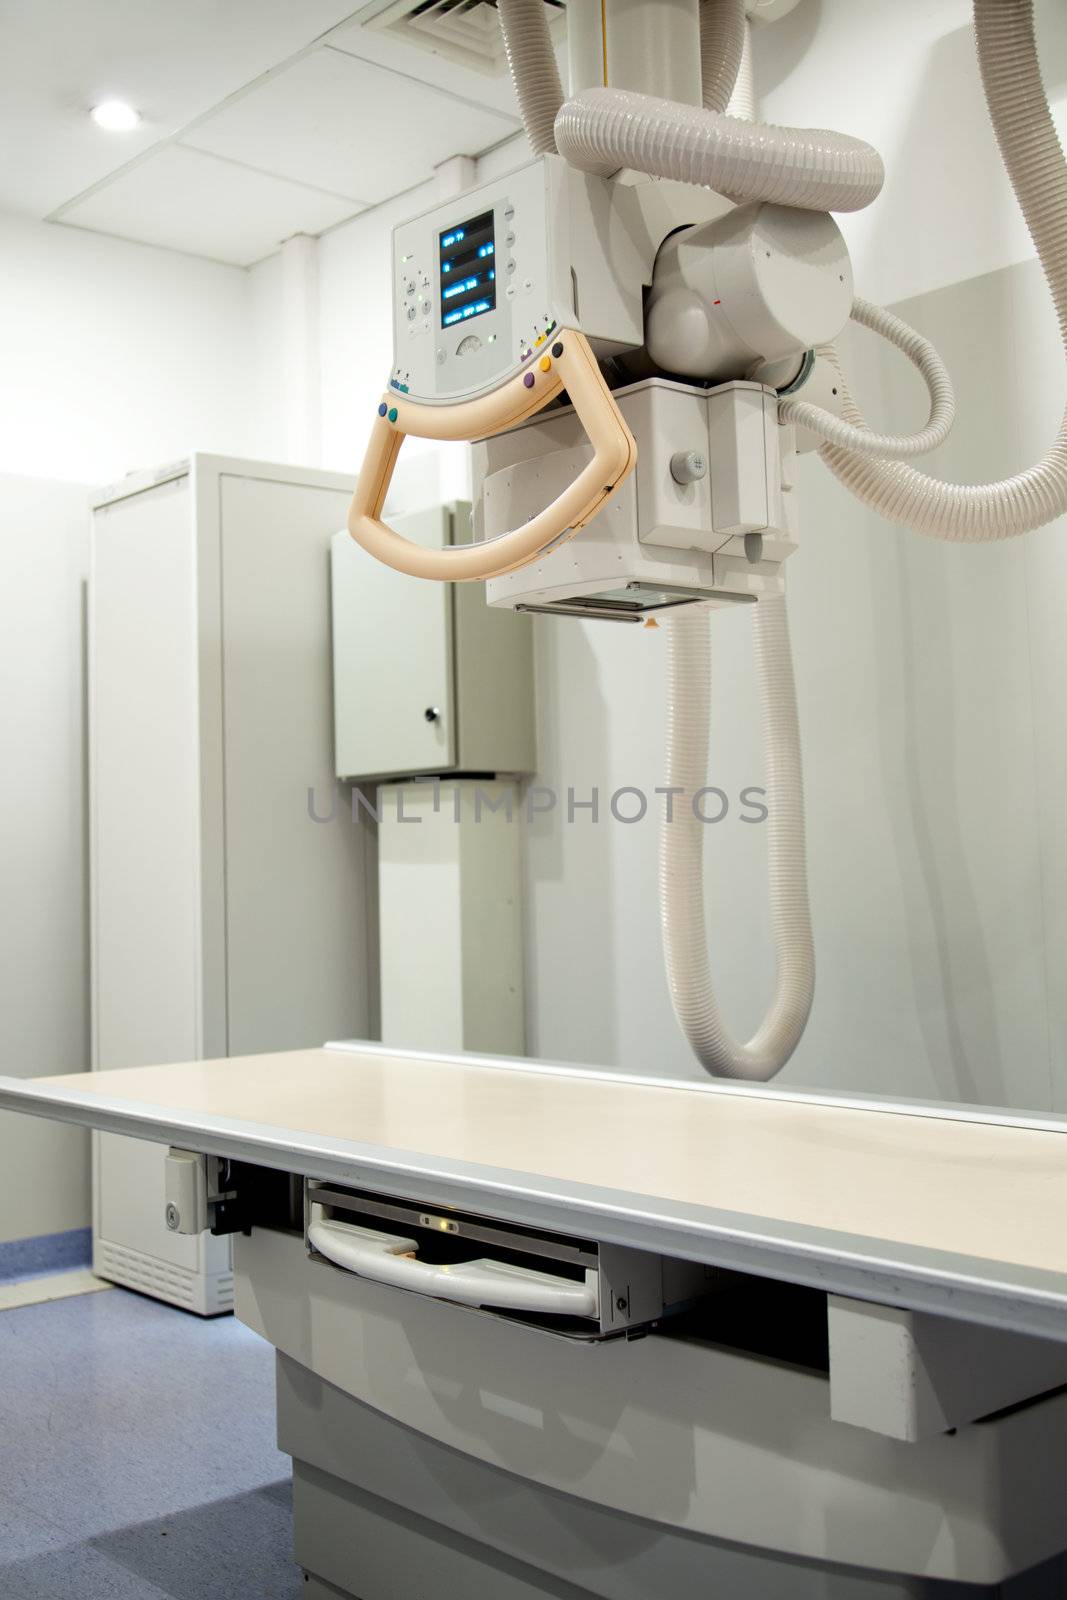 An x-ray machine with x-ray table in a hospital